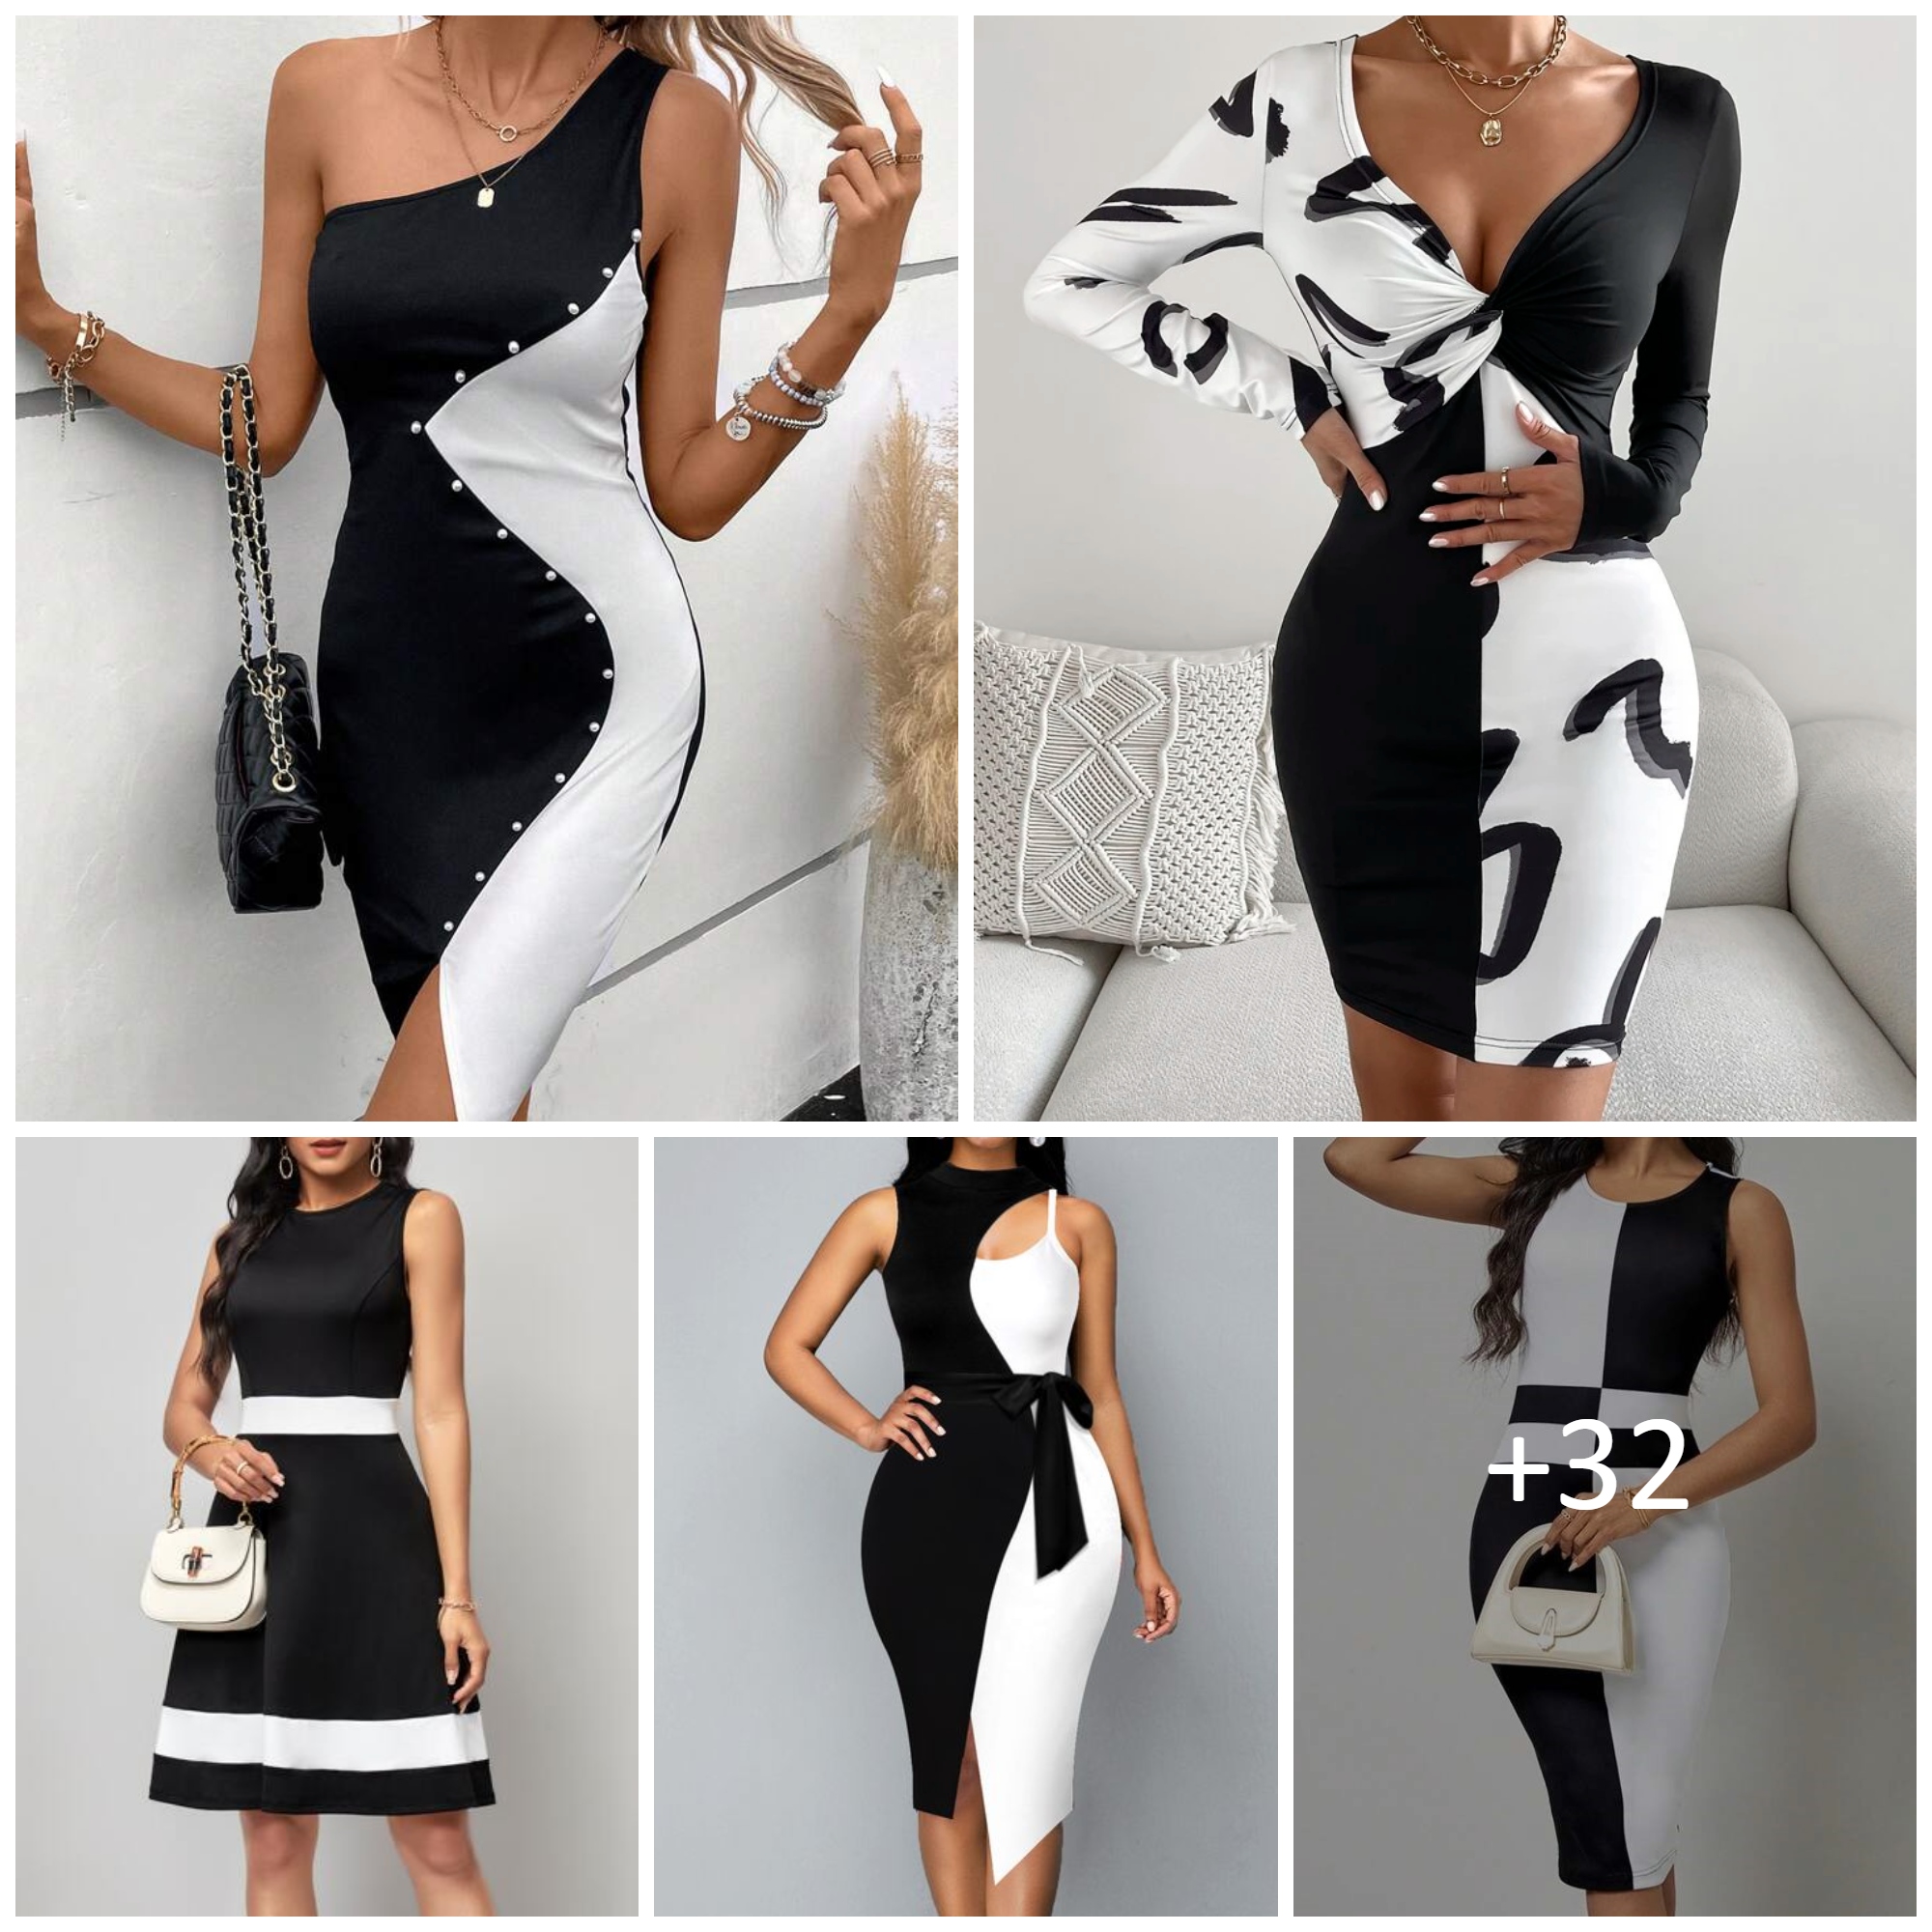 Amazing Black and White Striped Dresses